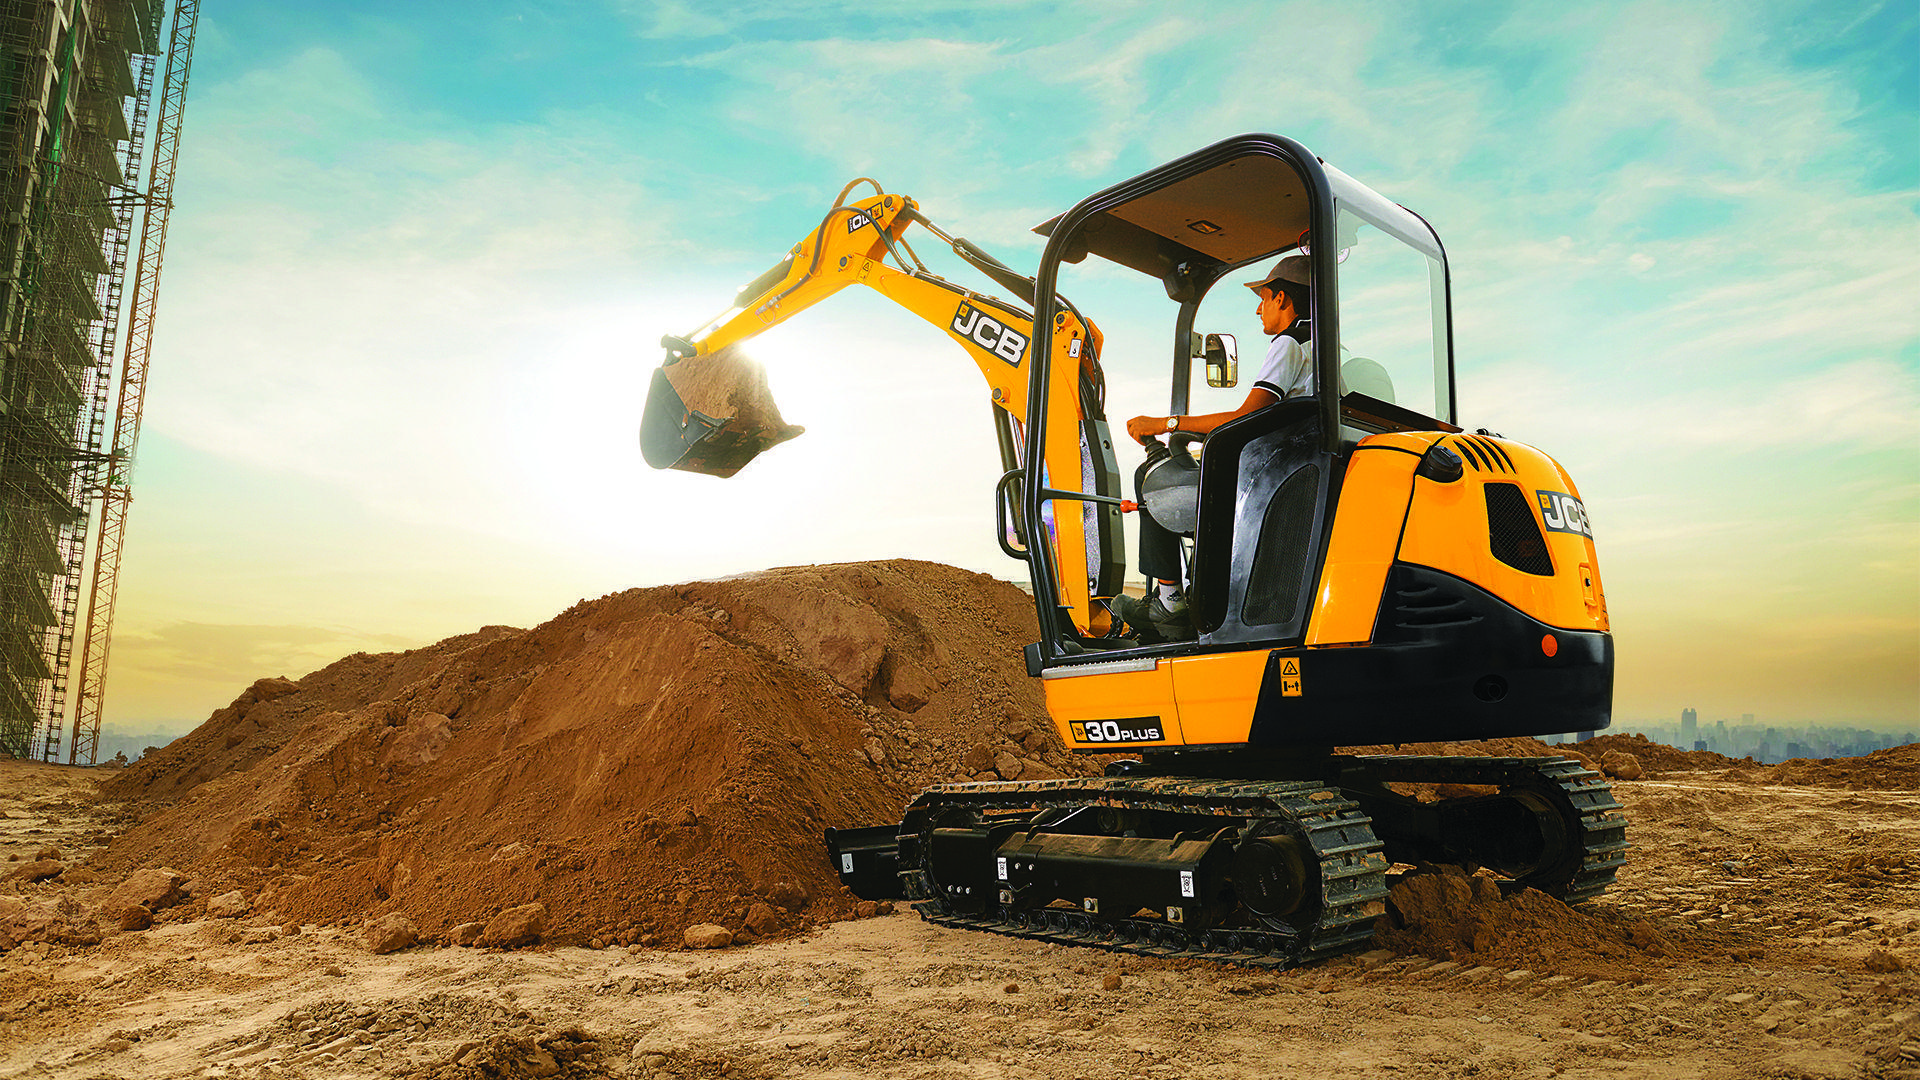 JCB Image, Photo and Wallpaper India Product Image